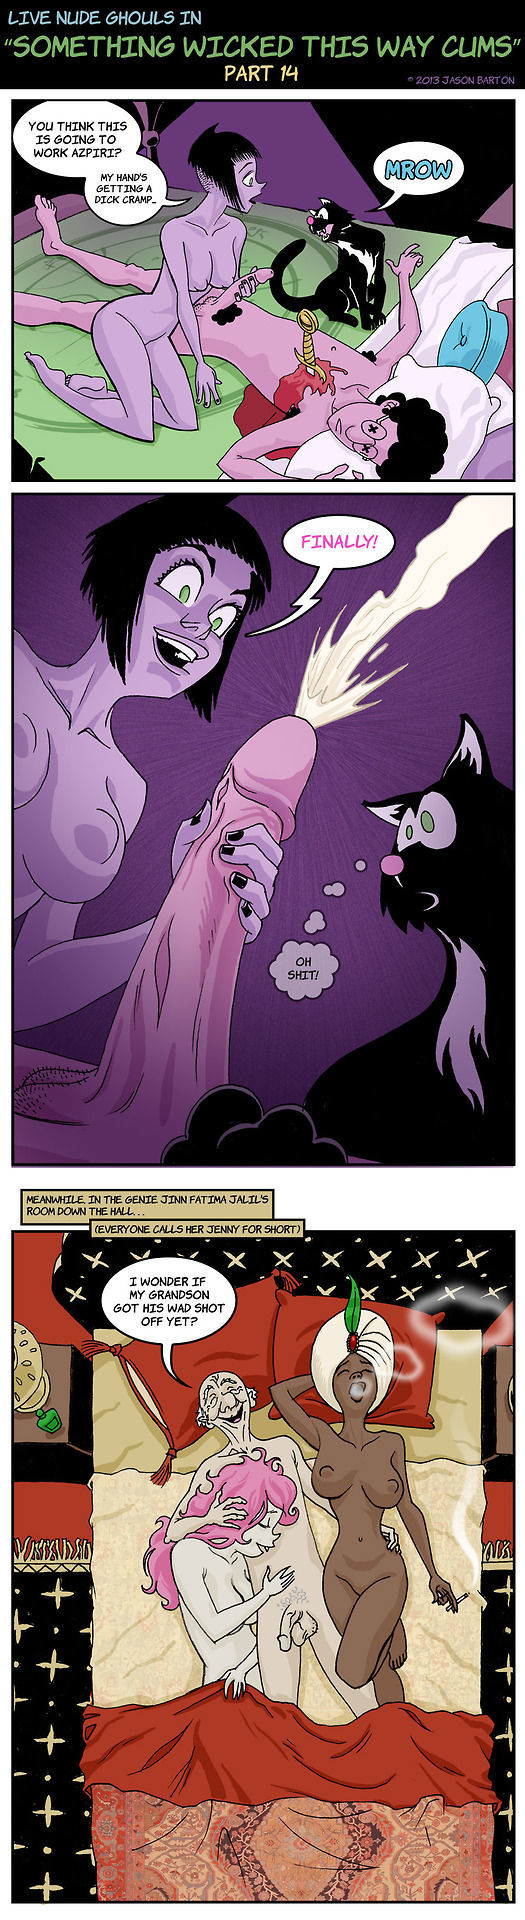 Live Nude Ghouls Something Wicked page 13